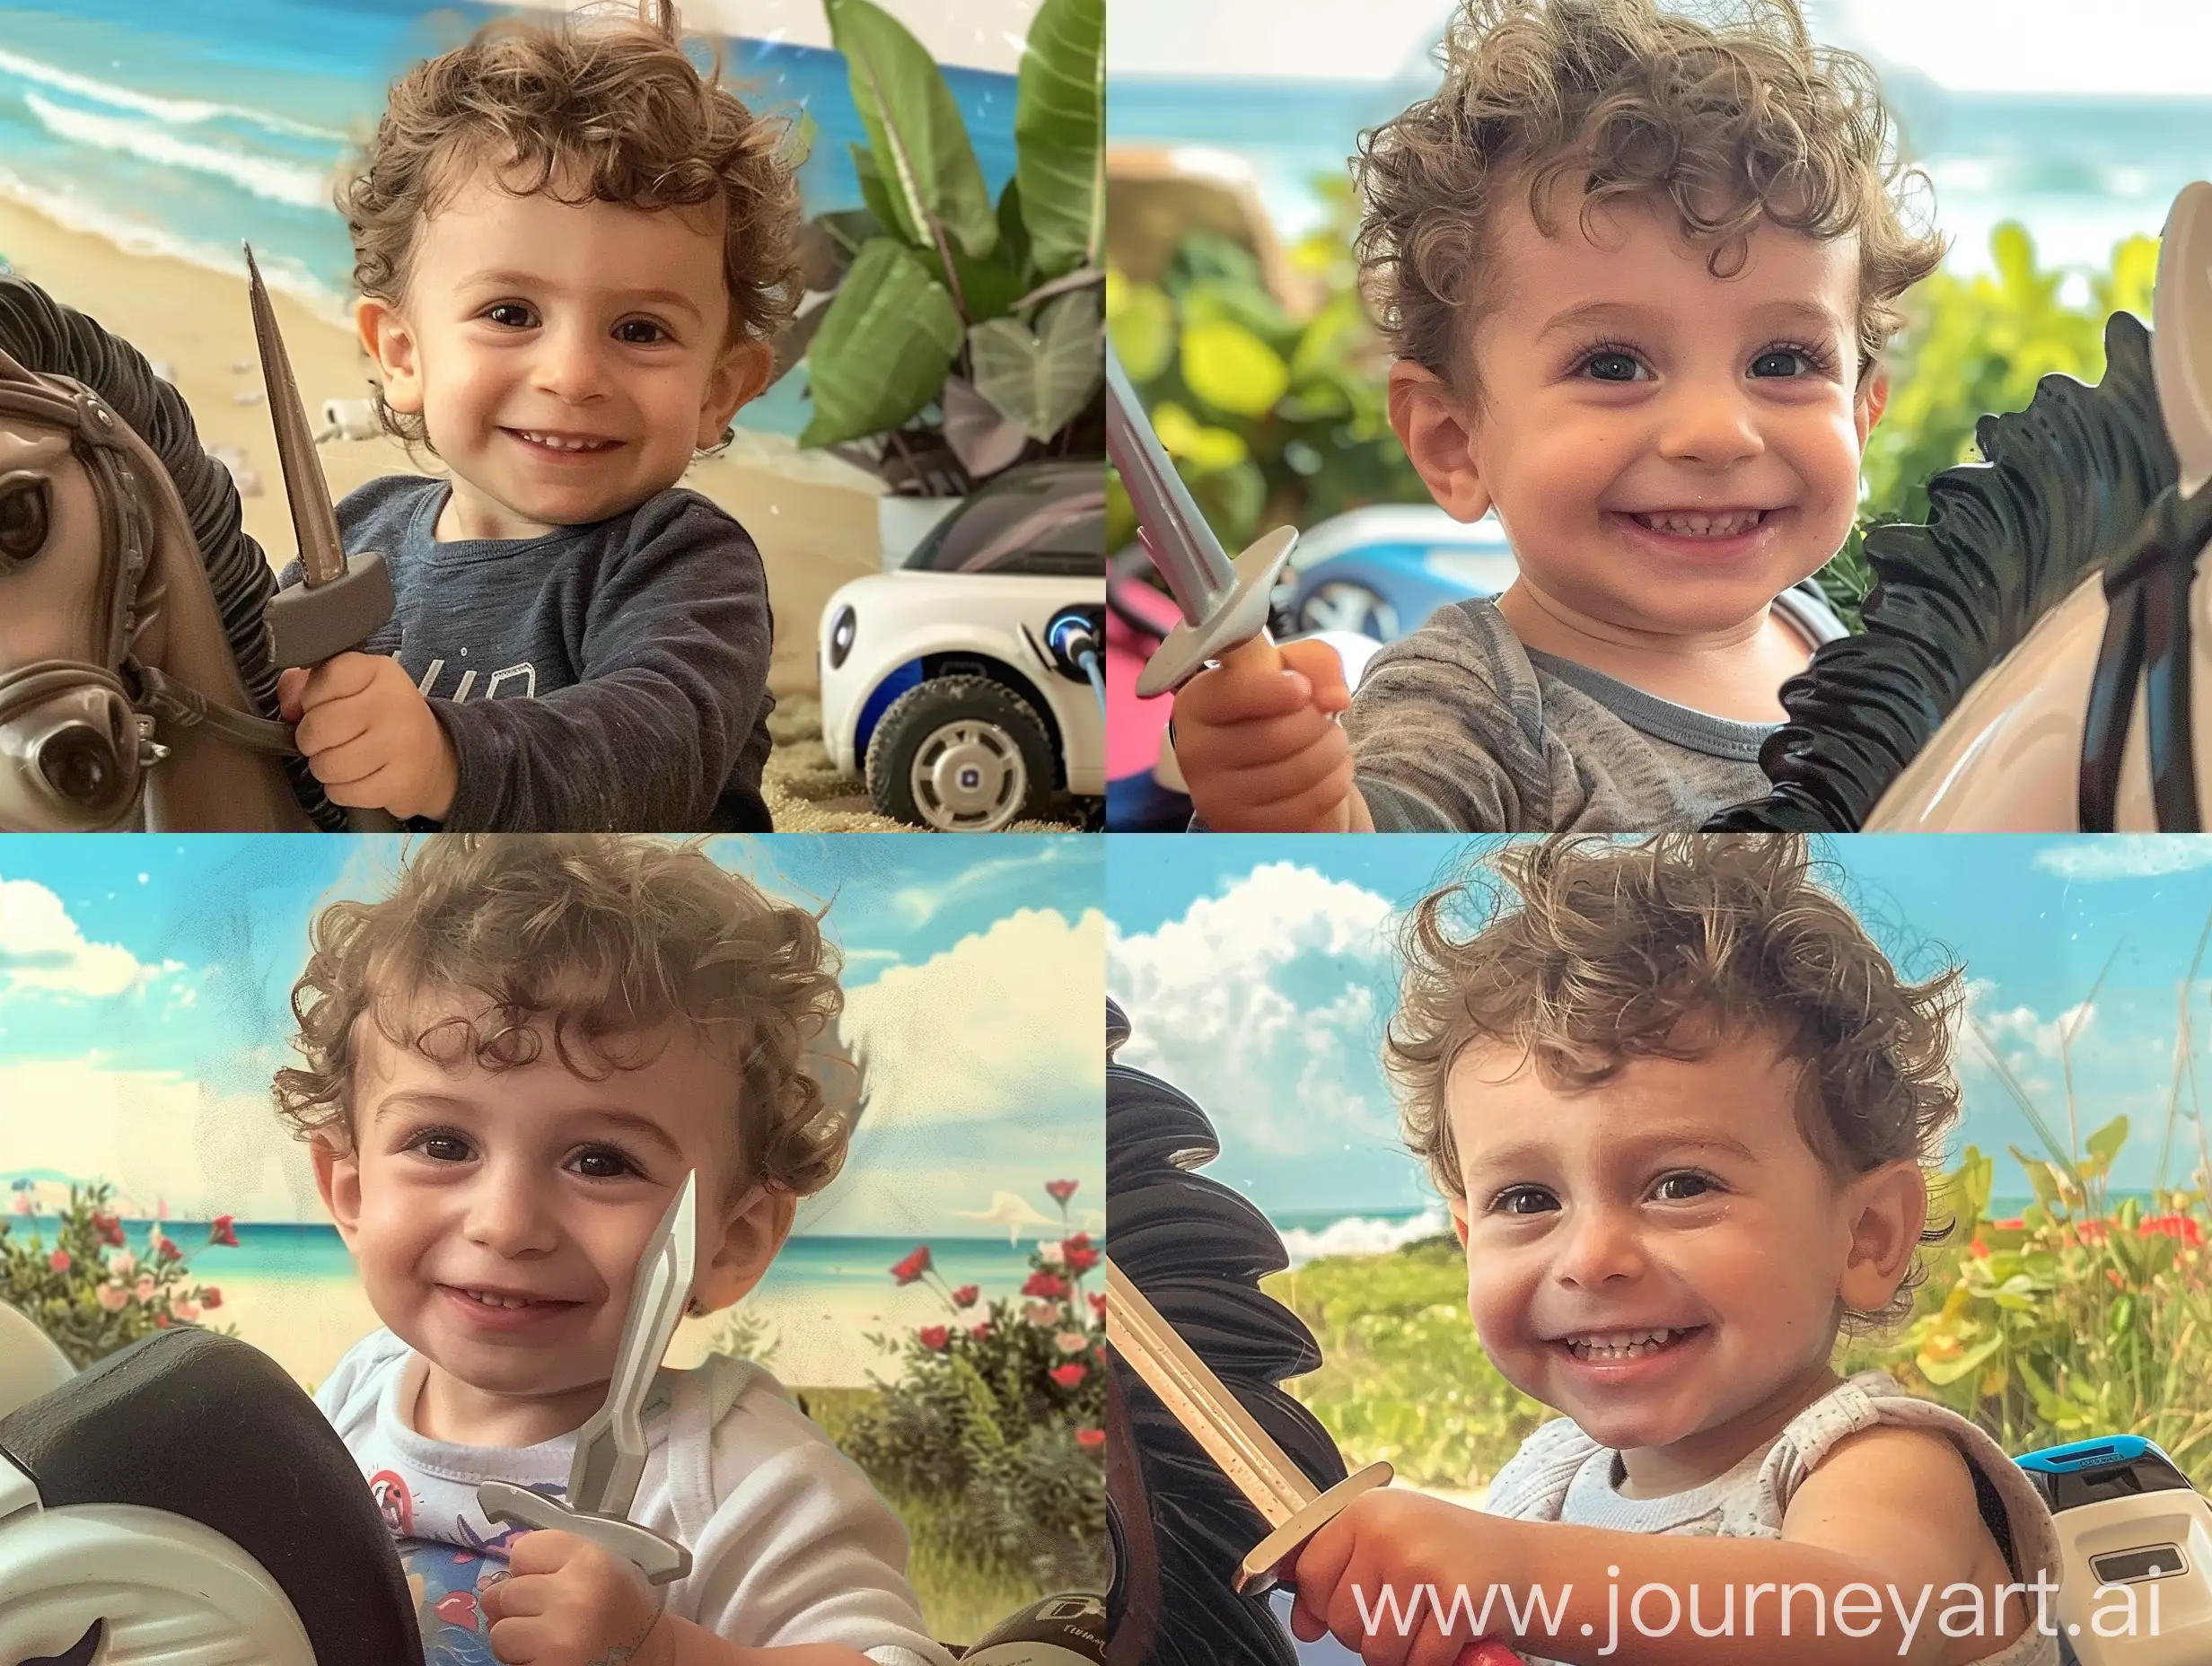 A smiling 2-year-old boy on a horse with a sword in his hand. Sea, beach, garden and battery car.